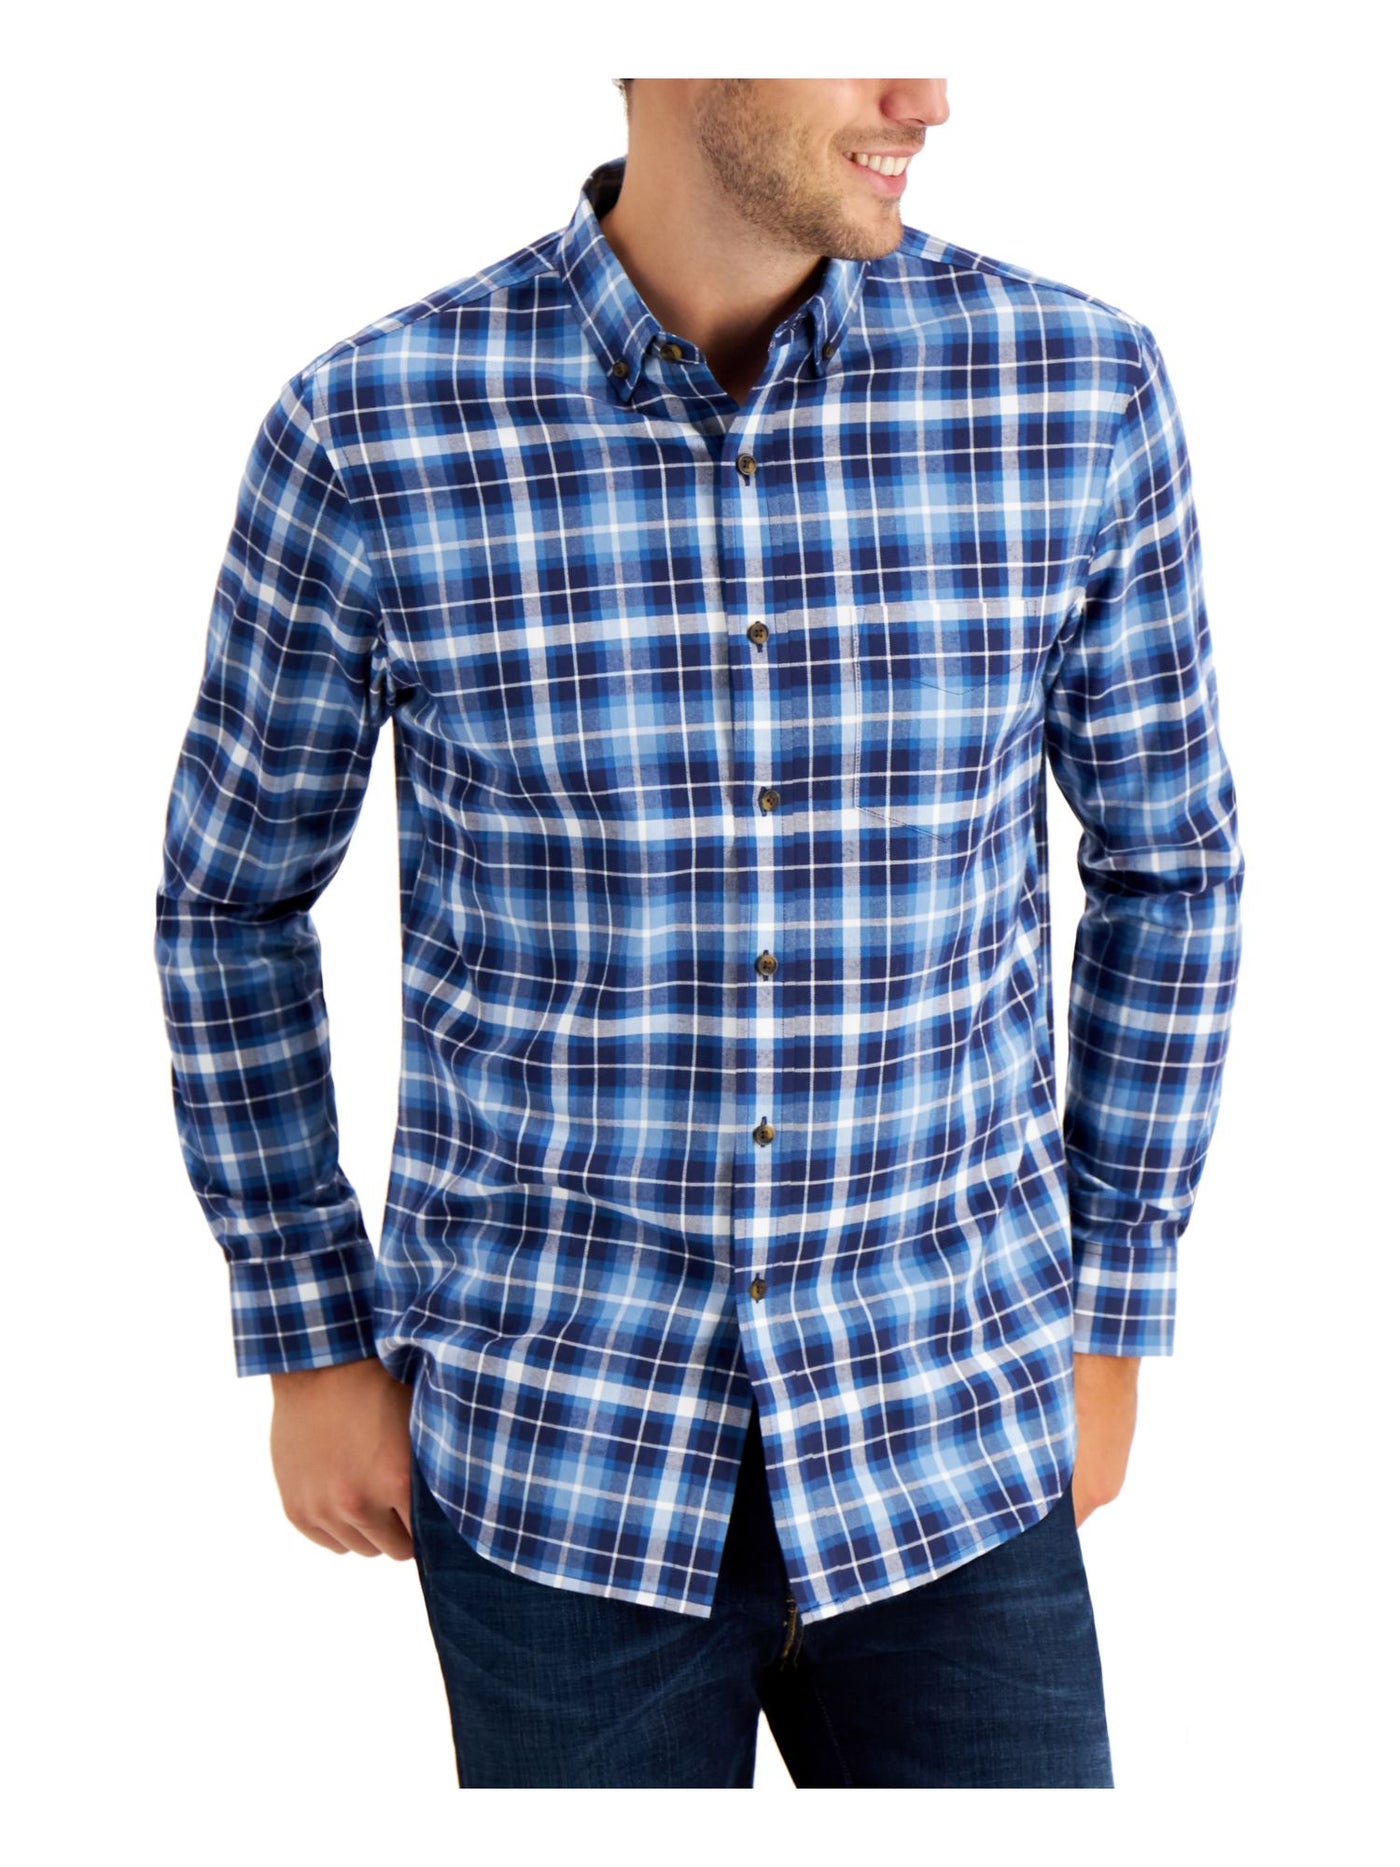 CLUBROOM Mens Navy Plaid Collared Classic Fit Button Down Cotton Blend Cotton Blend Shirt S